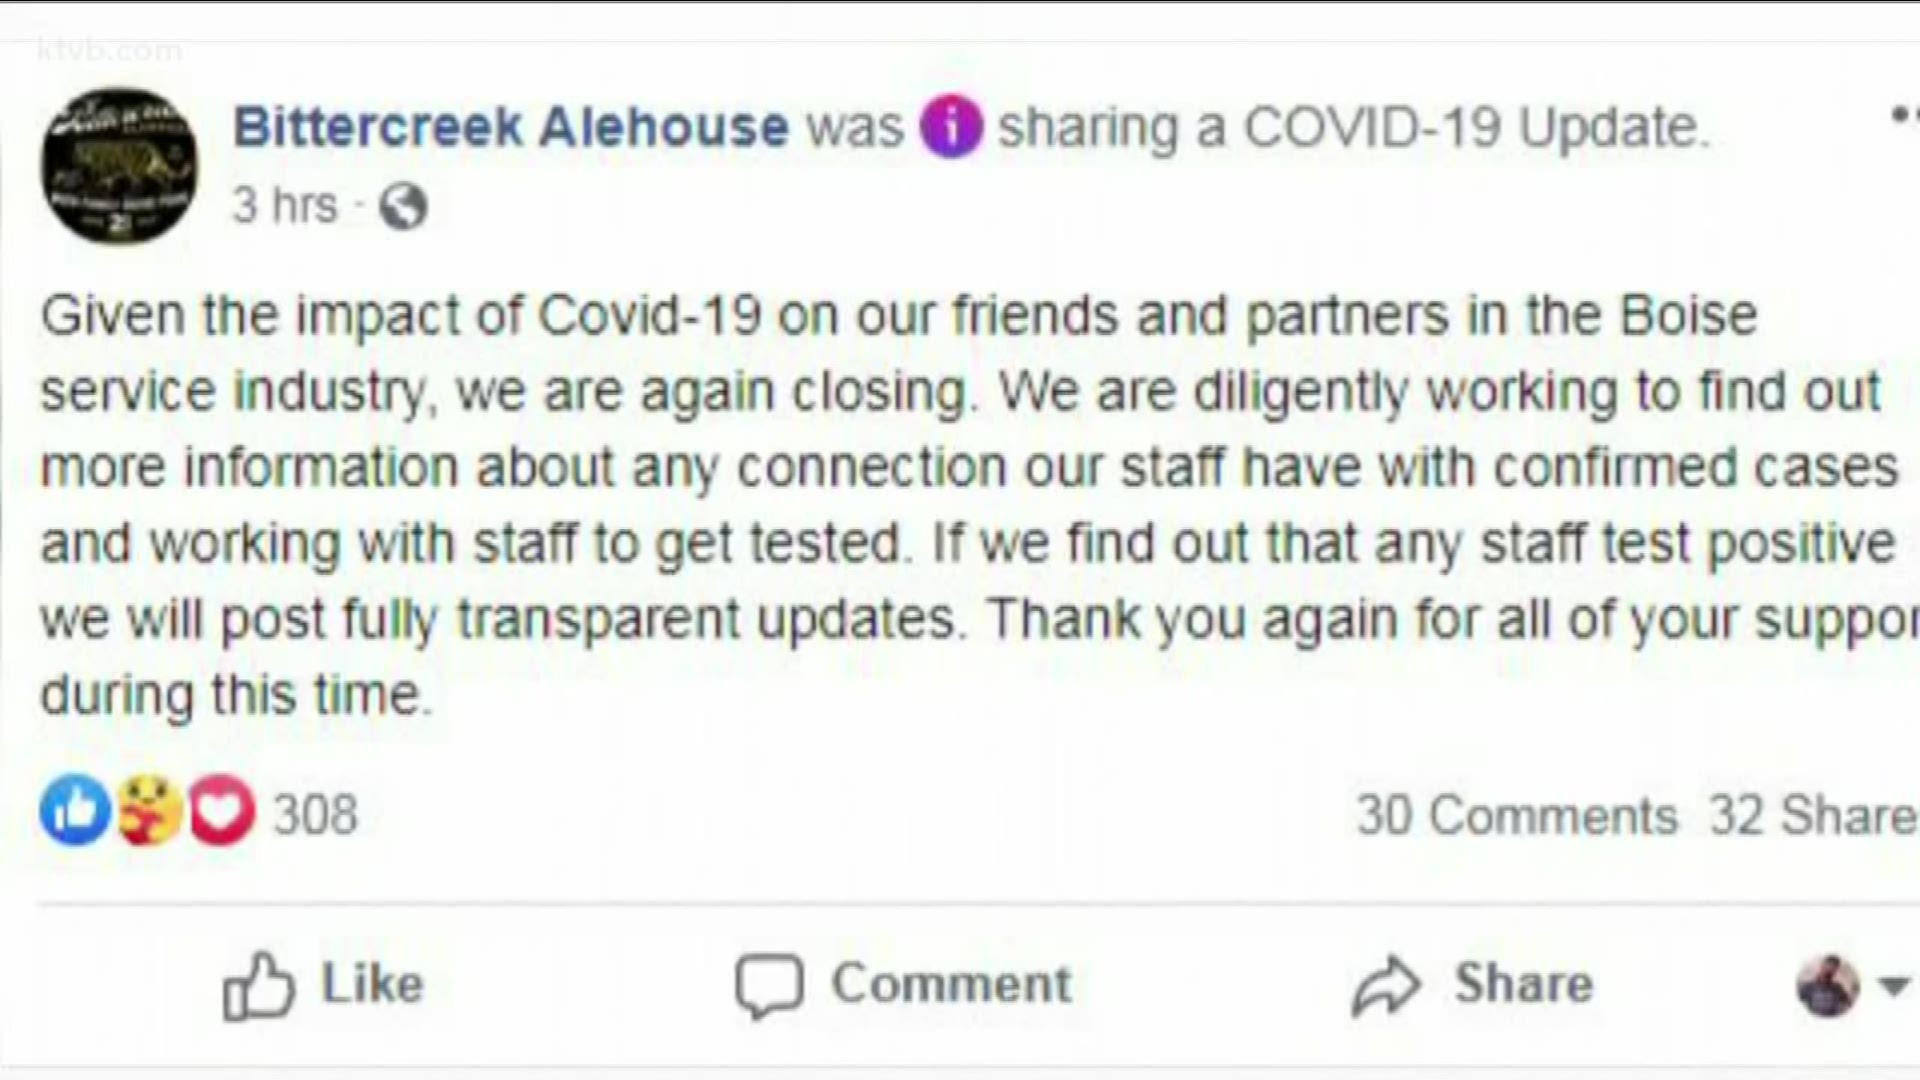 In a Facebook post on Wednesday, Bittercreek said it was closing because of "the impact of Covid-19 on our friends and partners in the Boise service industry."